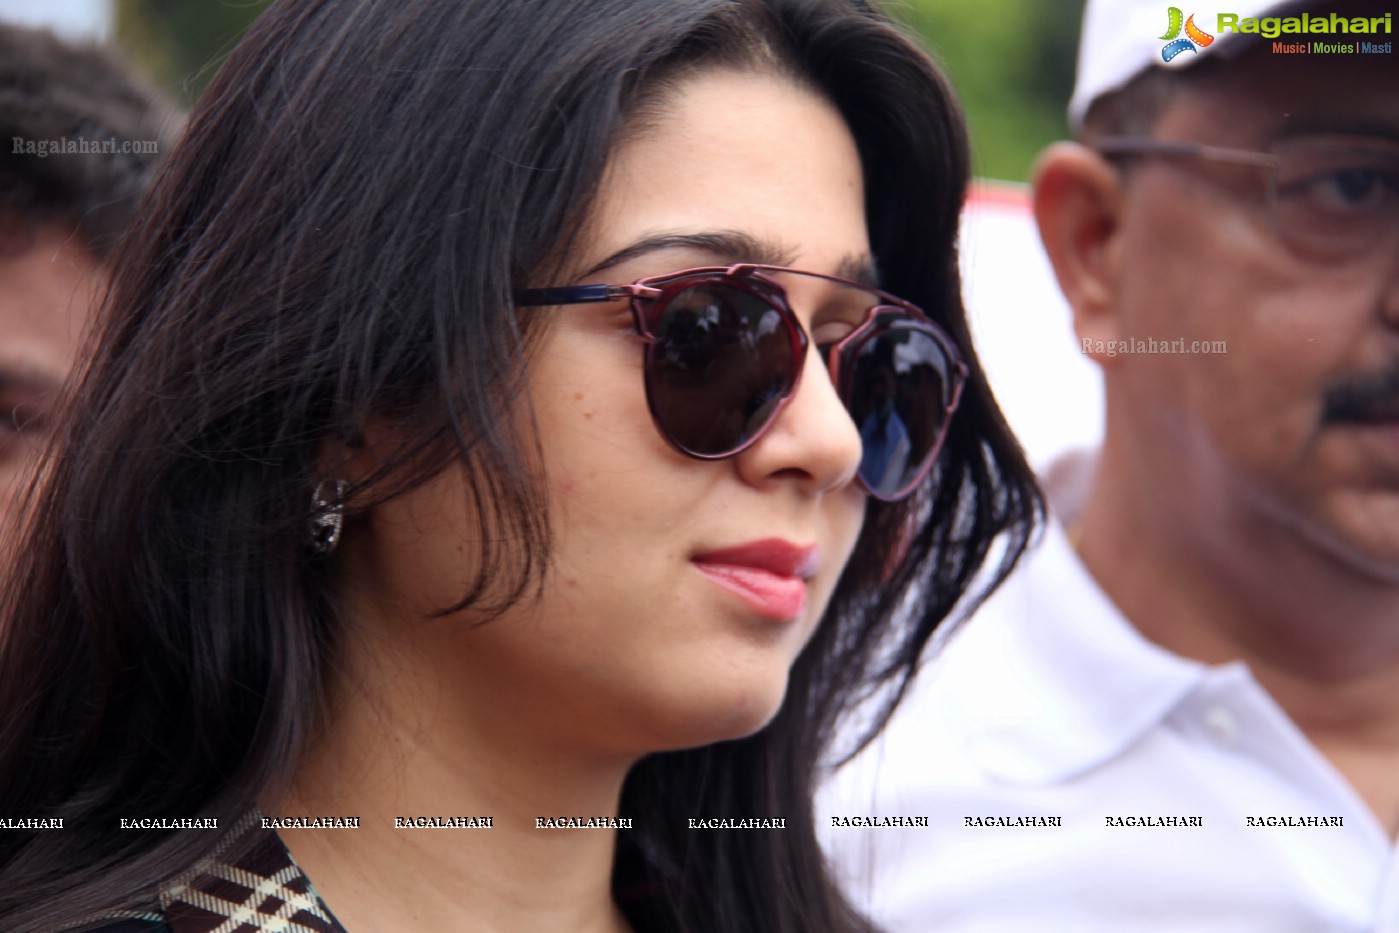 Charmme Kaur at World Toilet Day Walk, Hyderabad, Photo Gallery